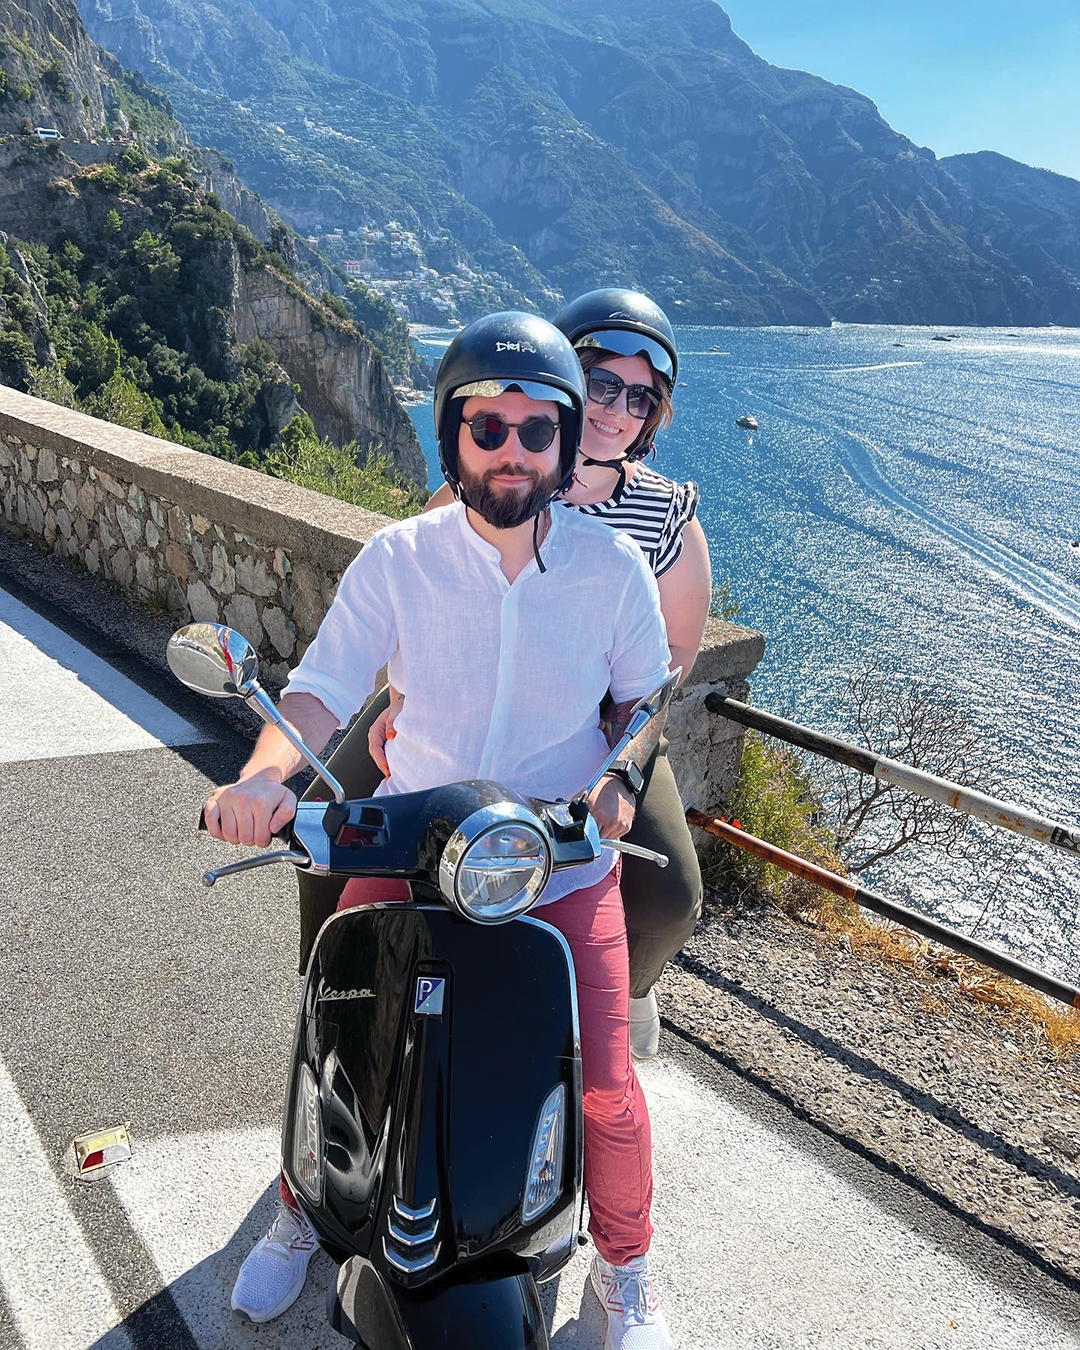 Kelsey and Cole spent their honeymoon on a Vespa tour around Italy’s Amalfi Coast and Rome.